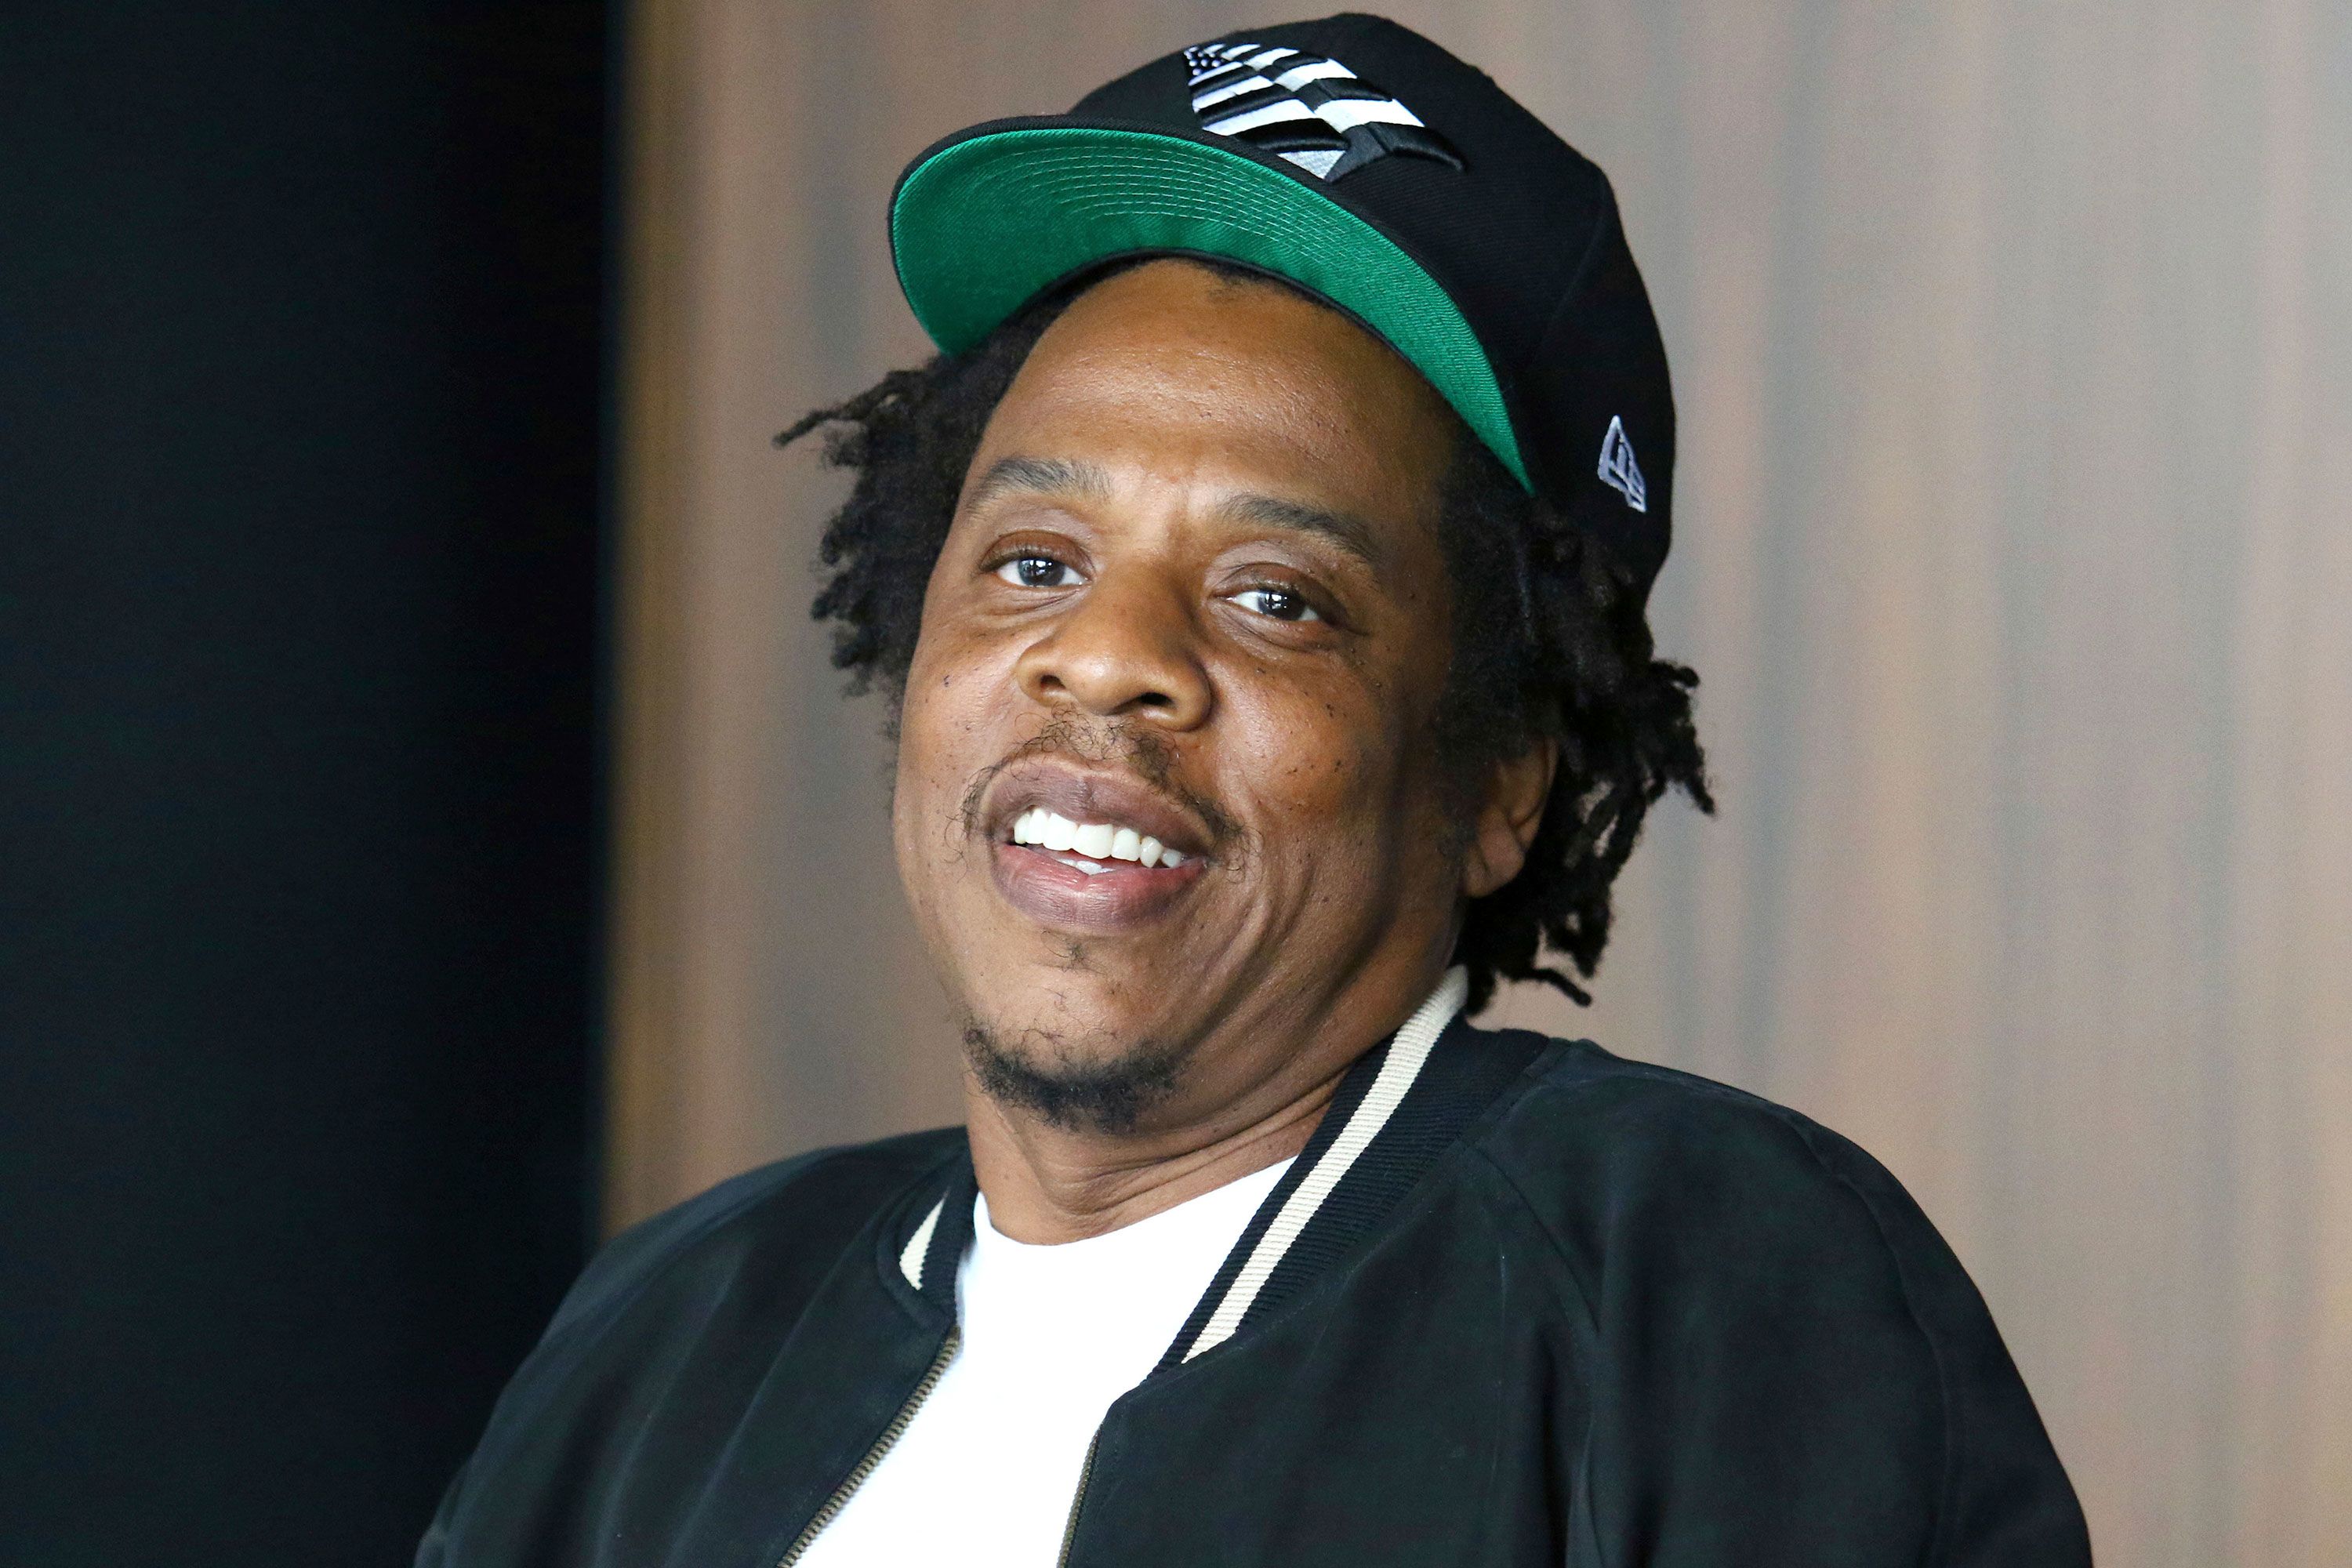 Jay-Z launches his very own cannabis line, Monogram